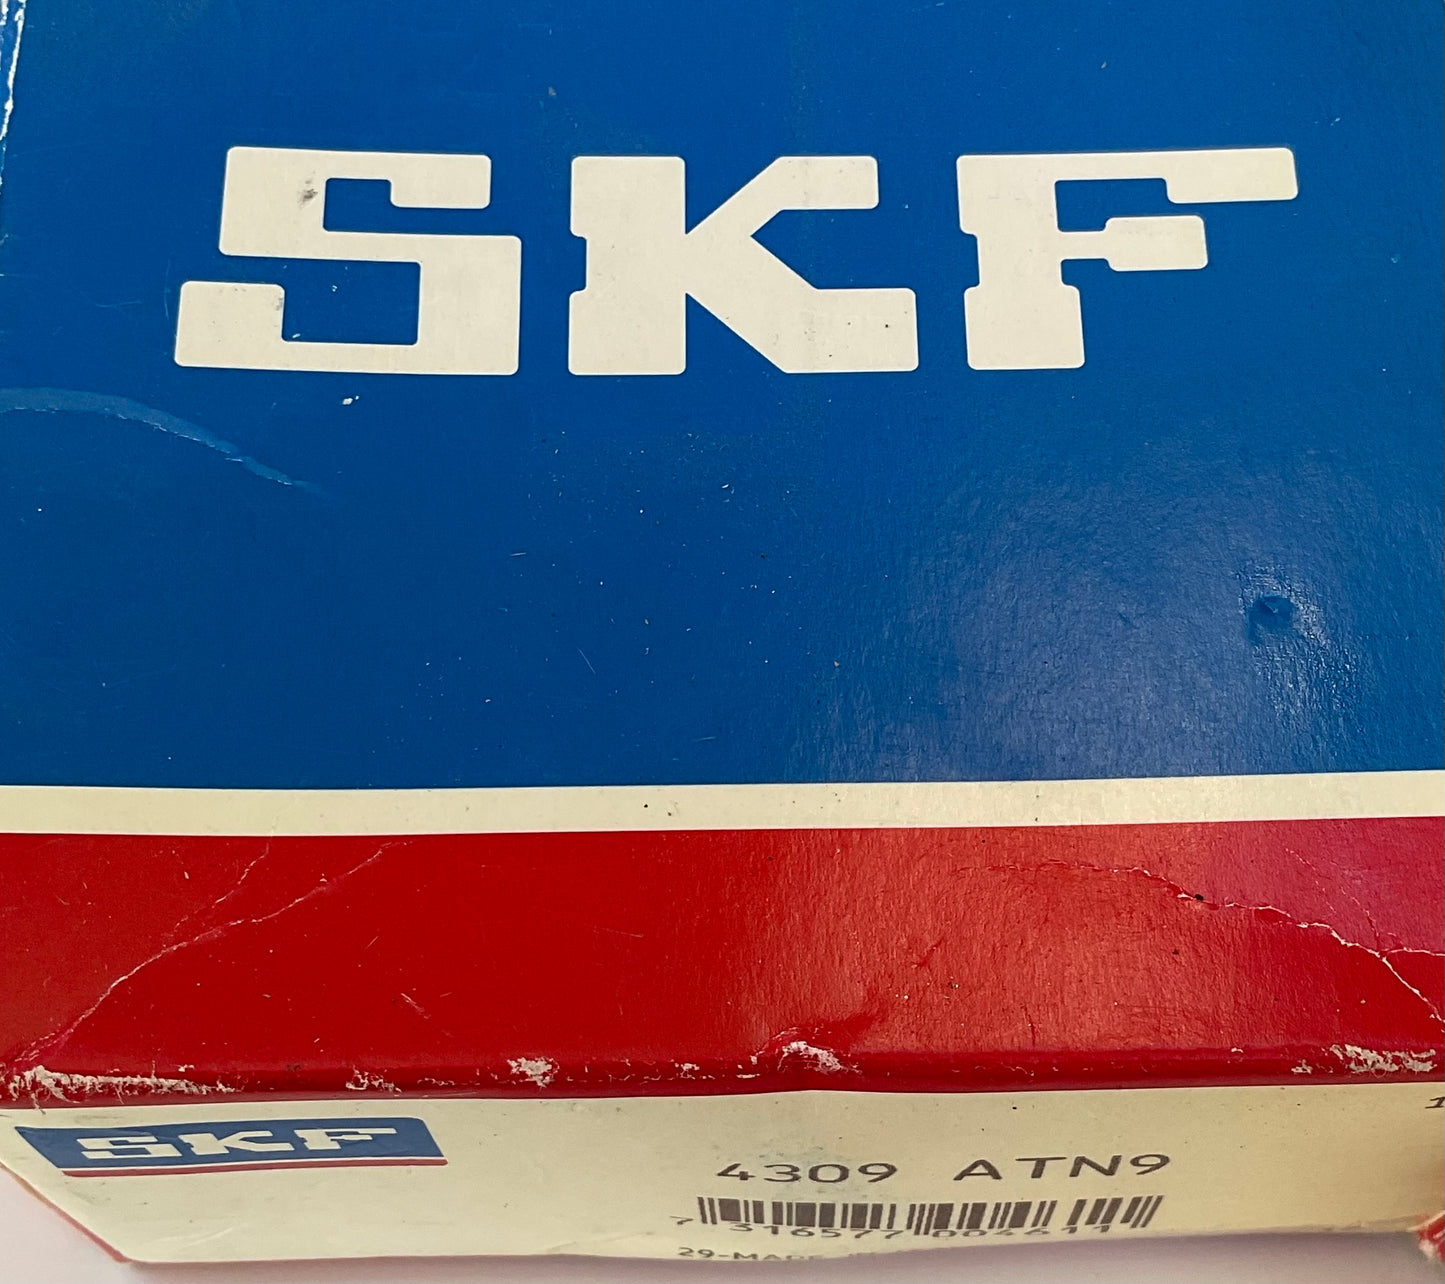 Roulement SKF 4309 ATN9